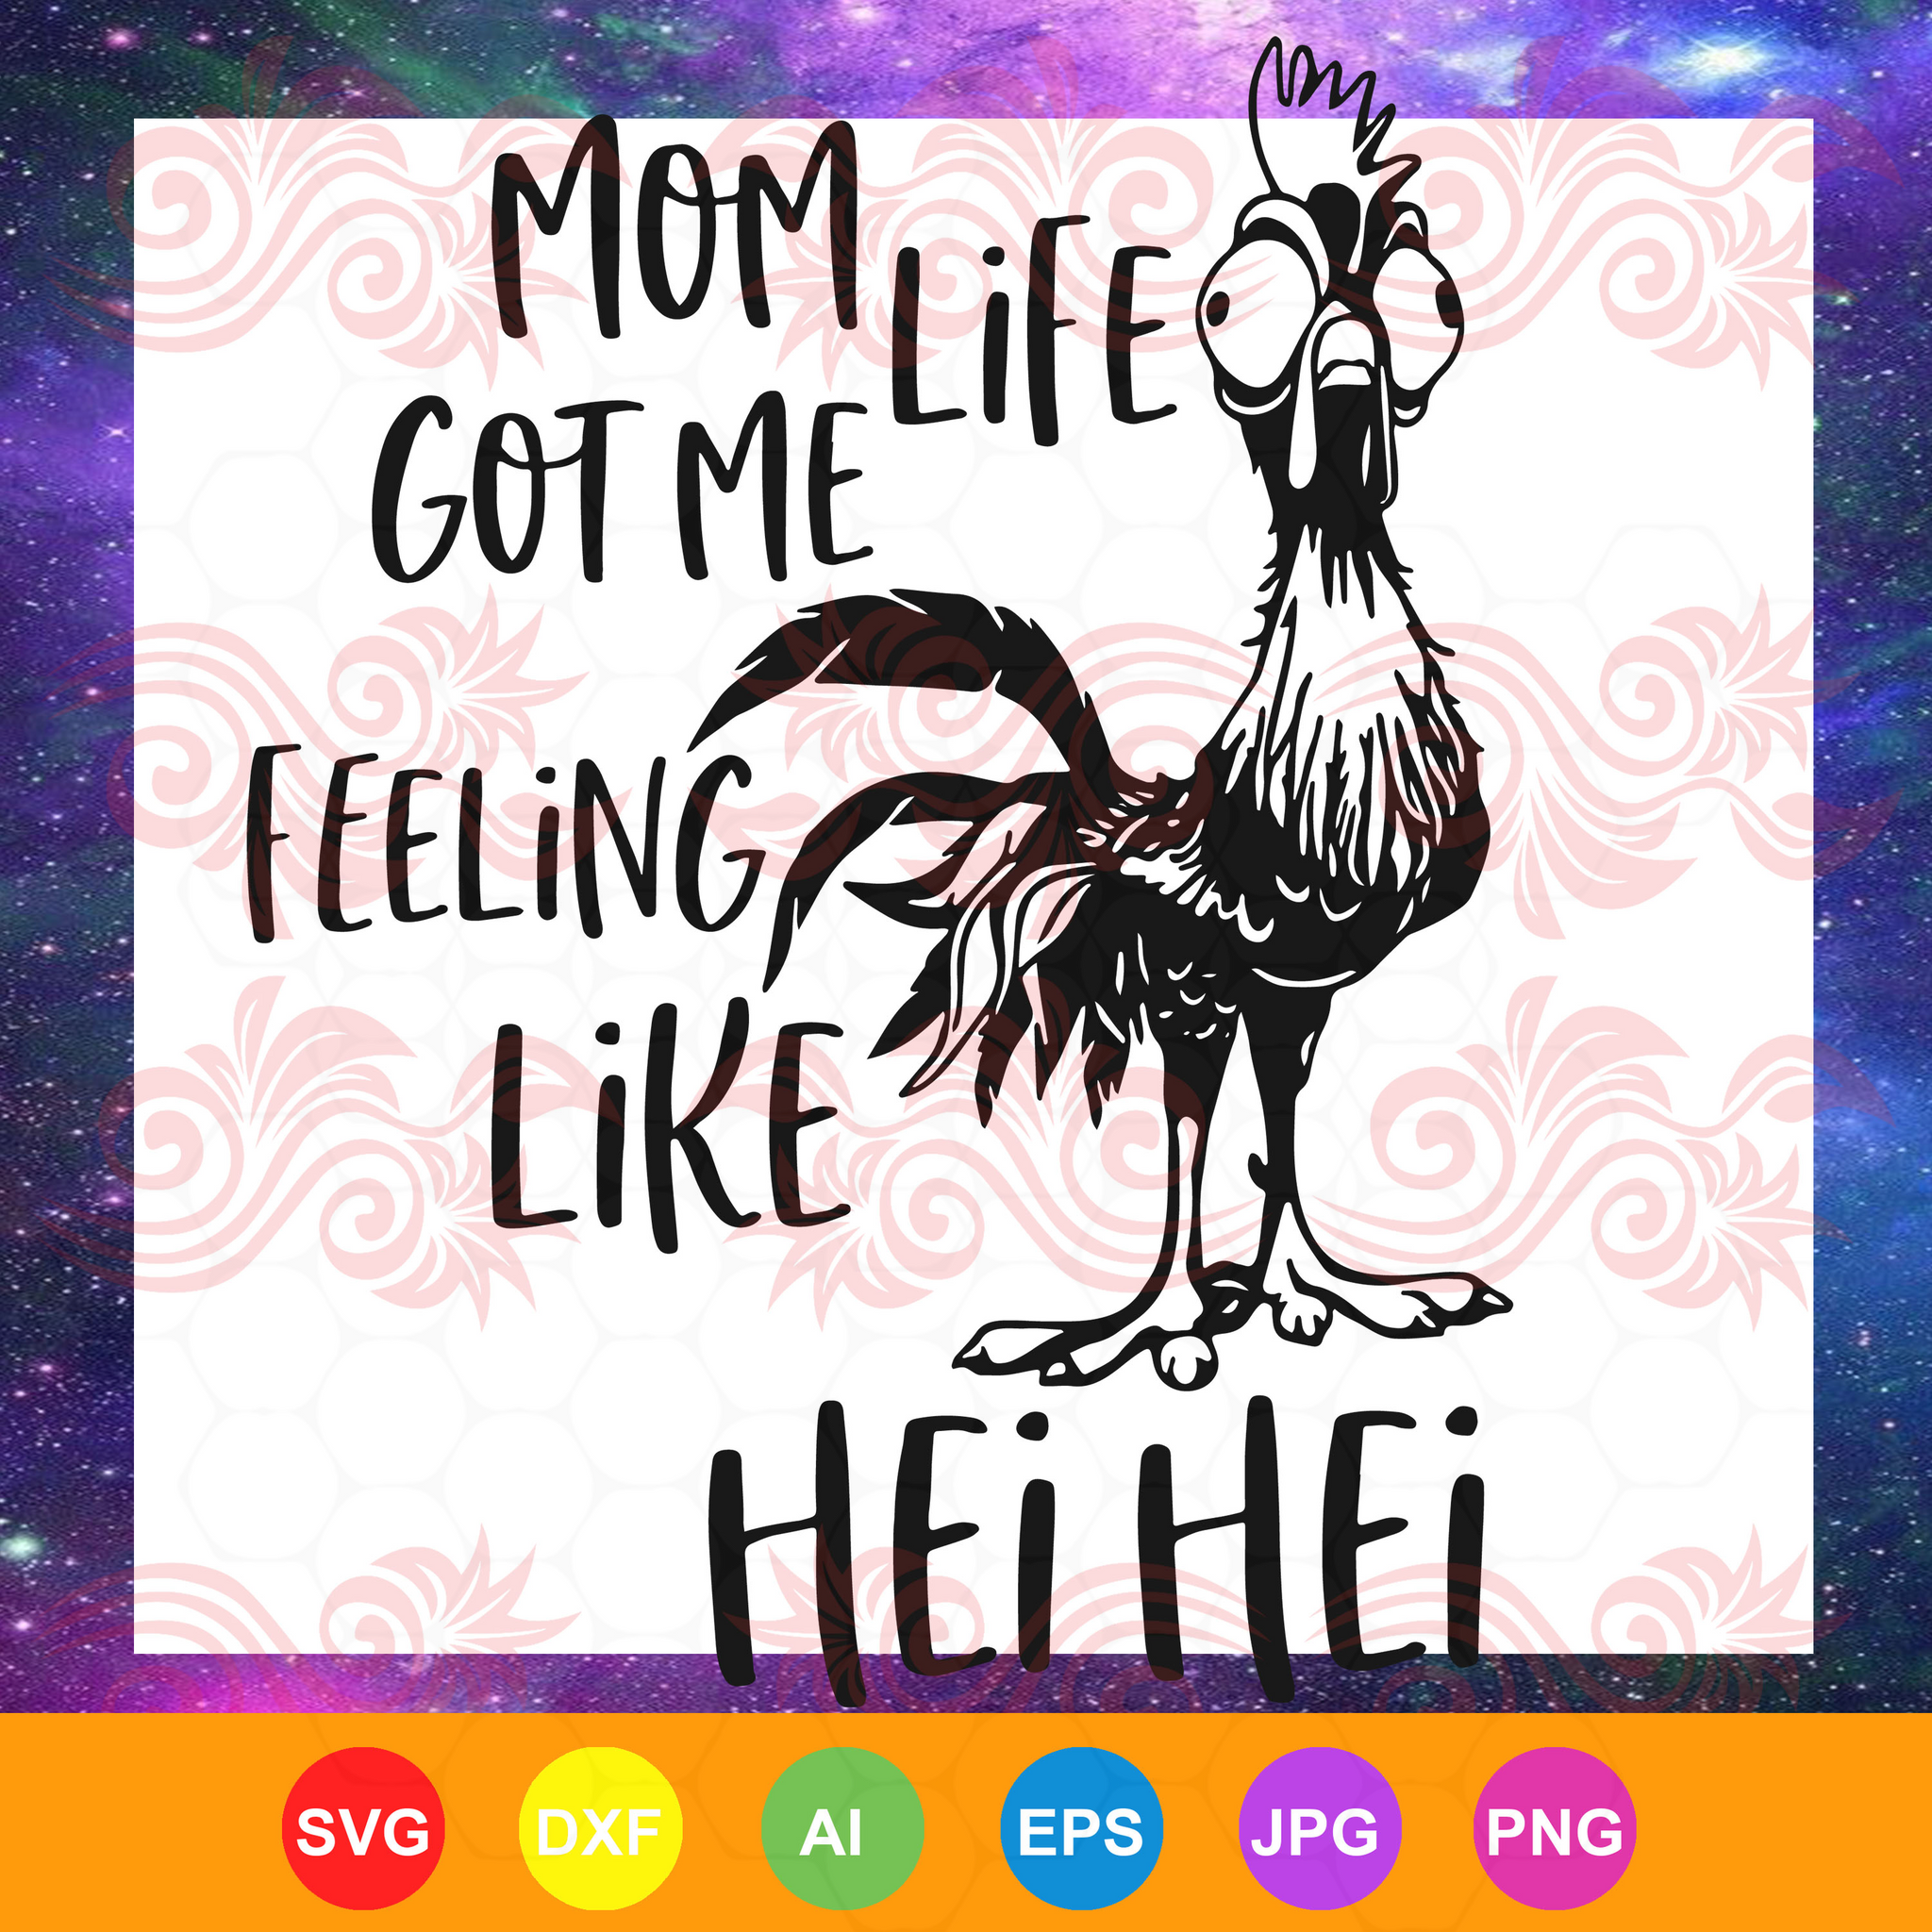 Digital For Cut Disney Mom Life Got Me Feelin Like Hei Hei Svg Dxf Moana File For Silhouette Cricut Png Stickers Stickers Labels s